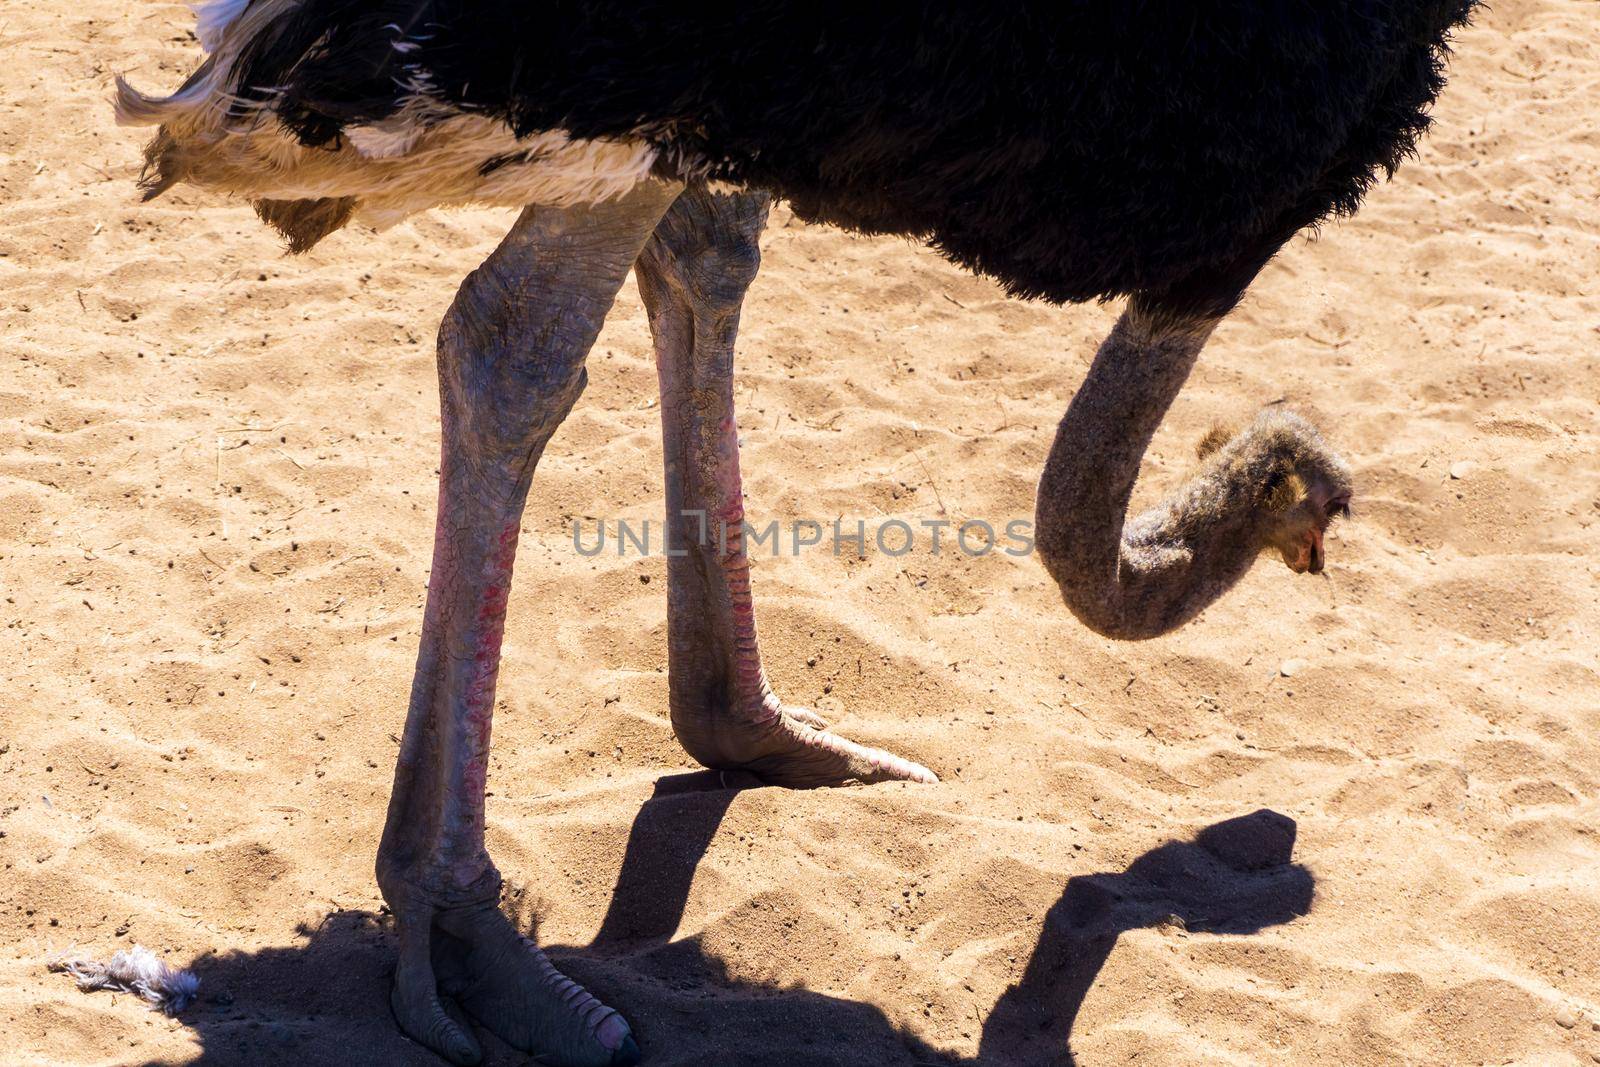 Ostrich in the desert on a background of sand close up